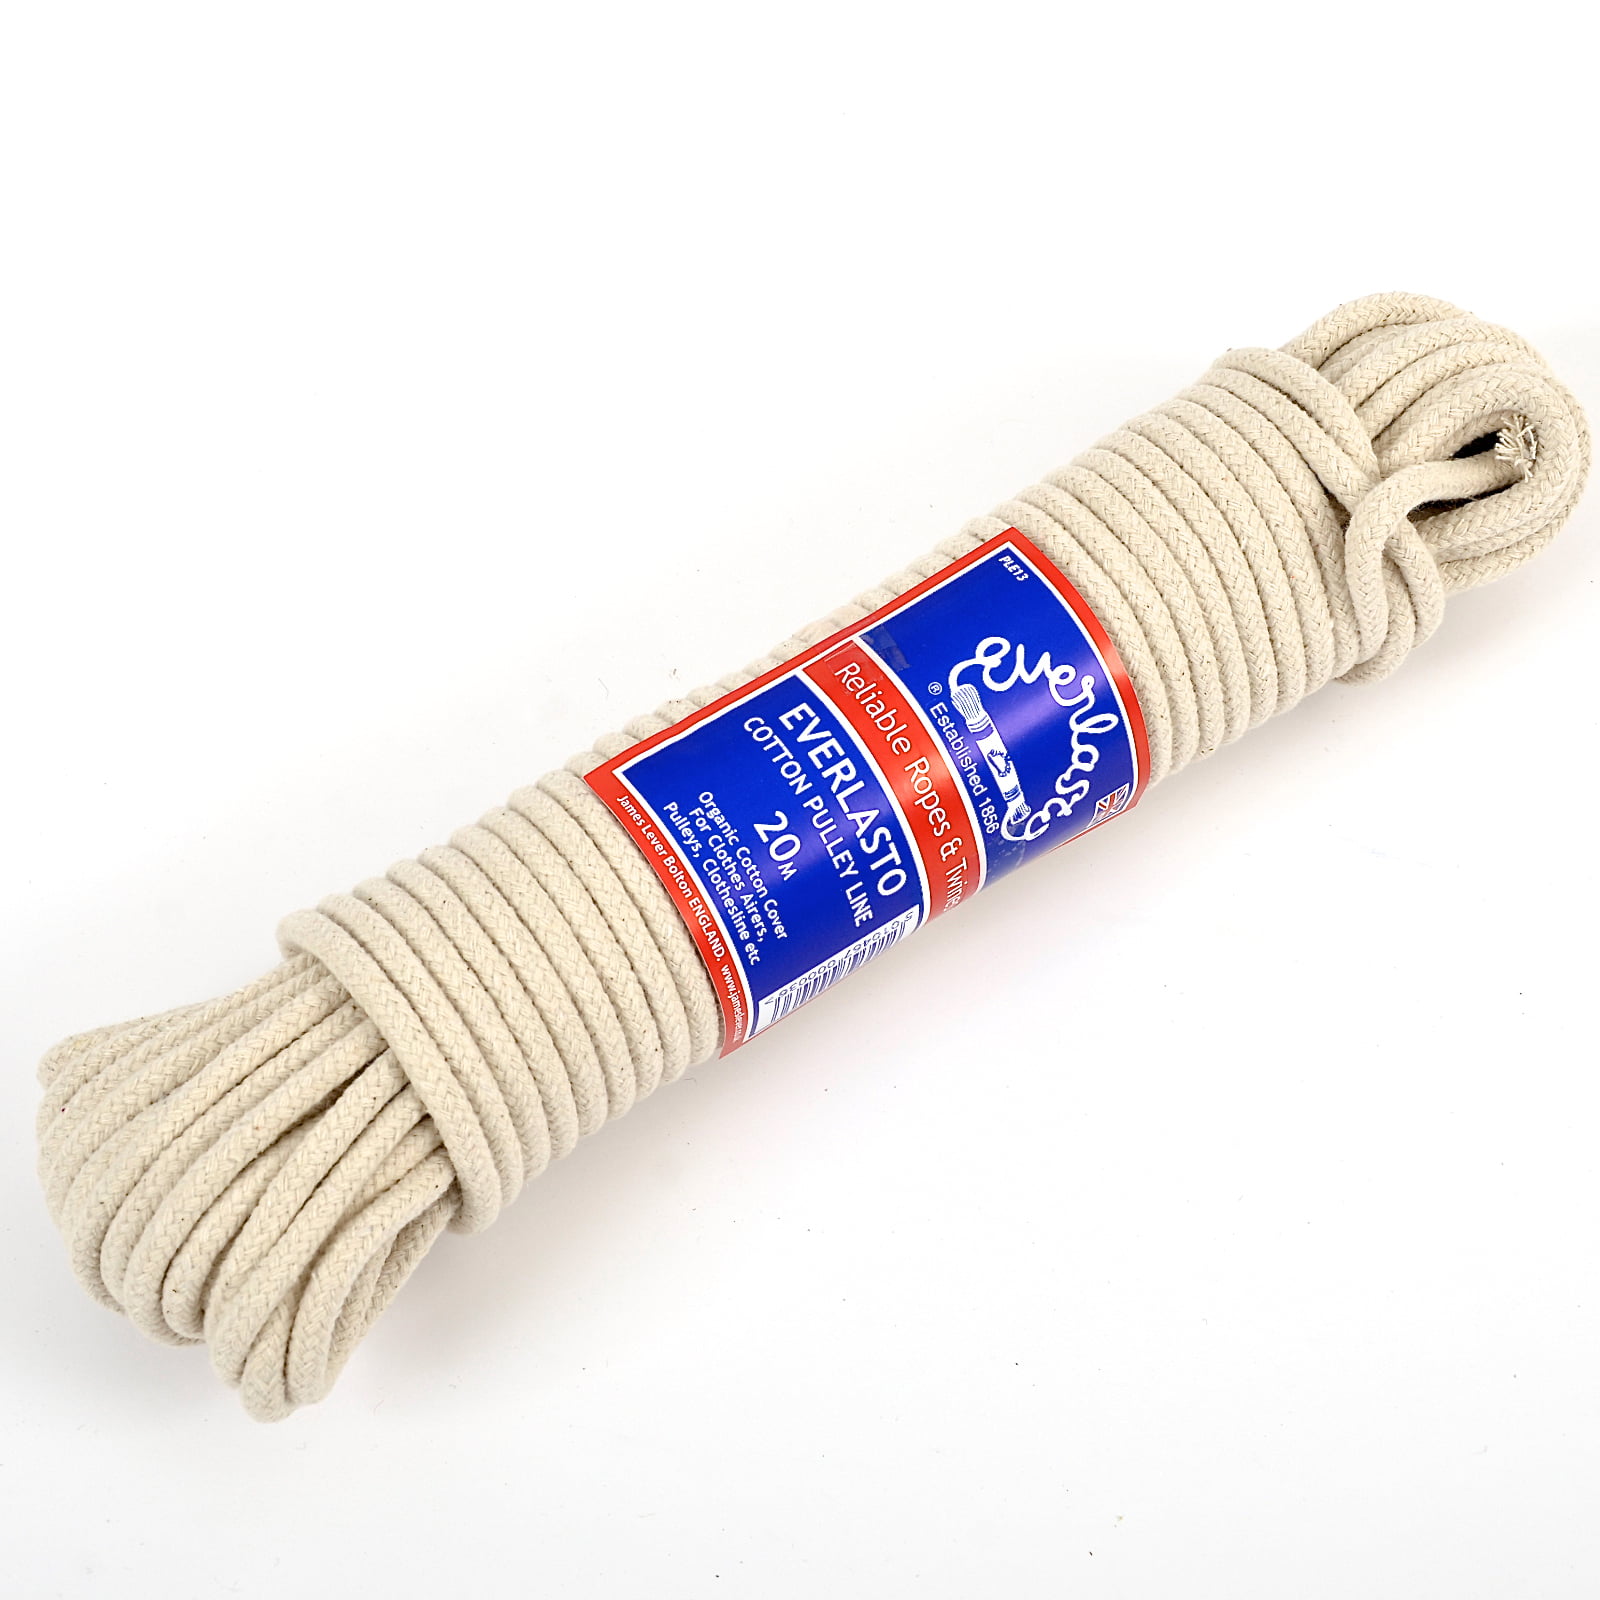 Candle Wick Self Watering Rope 7mm 15M Braided Cotton Soft Rope for Garden 2 Pack, 49ft Each Arts Crafts SUL 15Mtr Household Essentials Washing Line Rope,Pulley Line Sash Cord